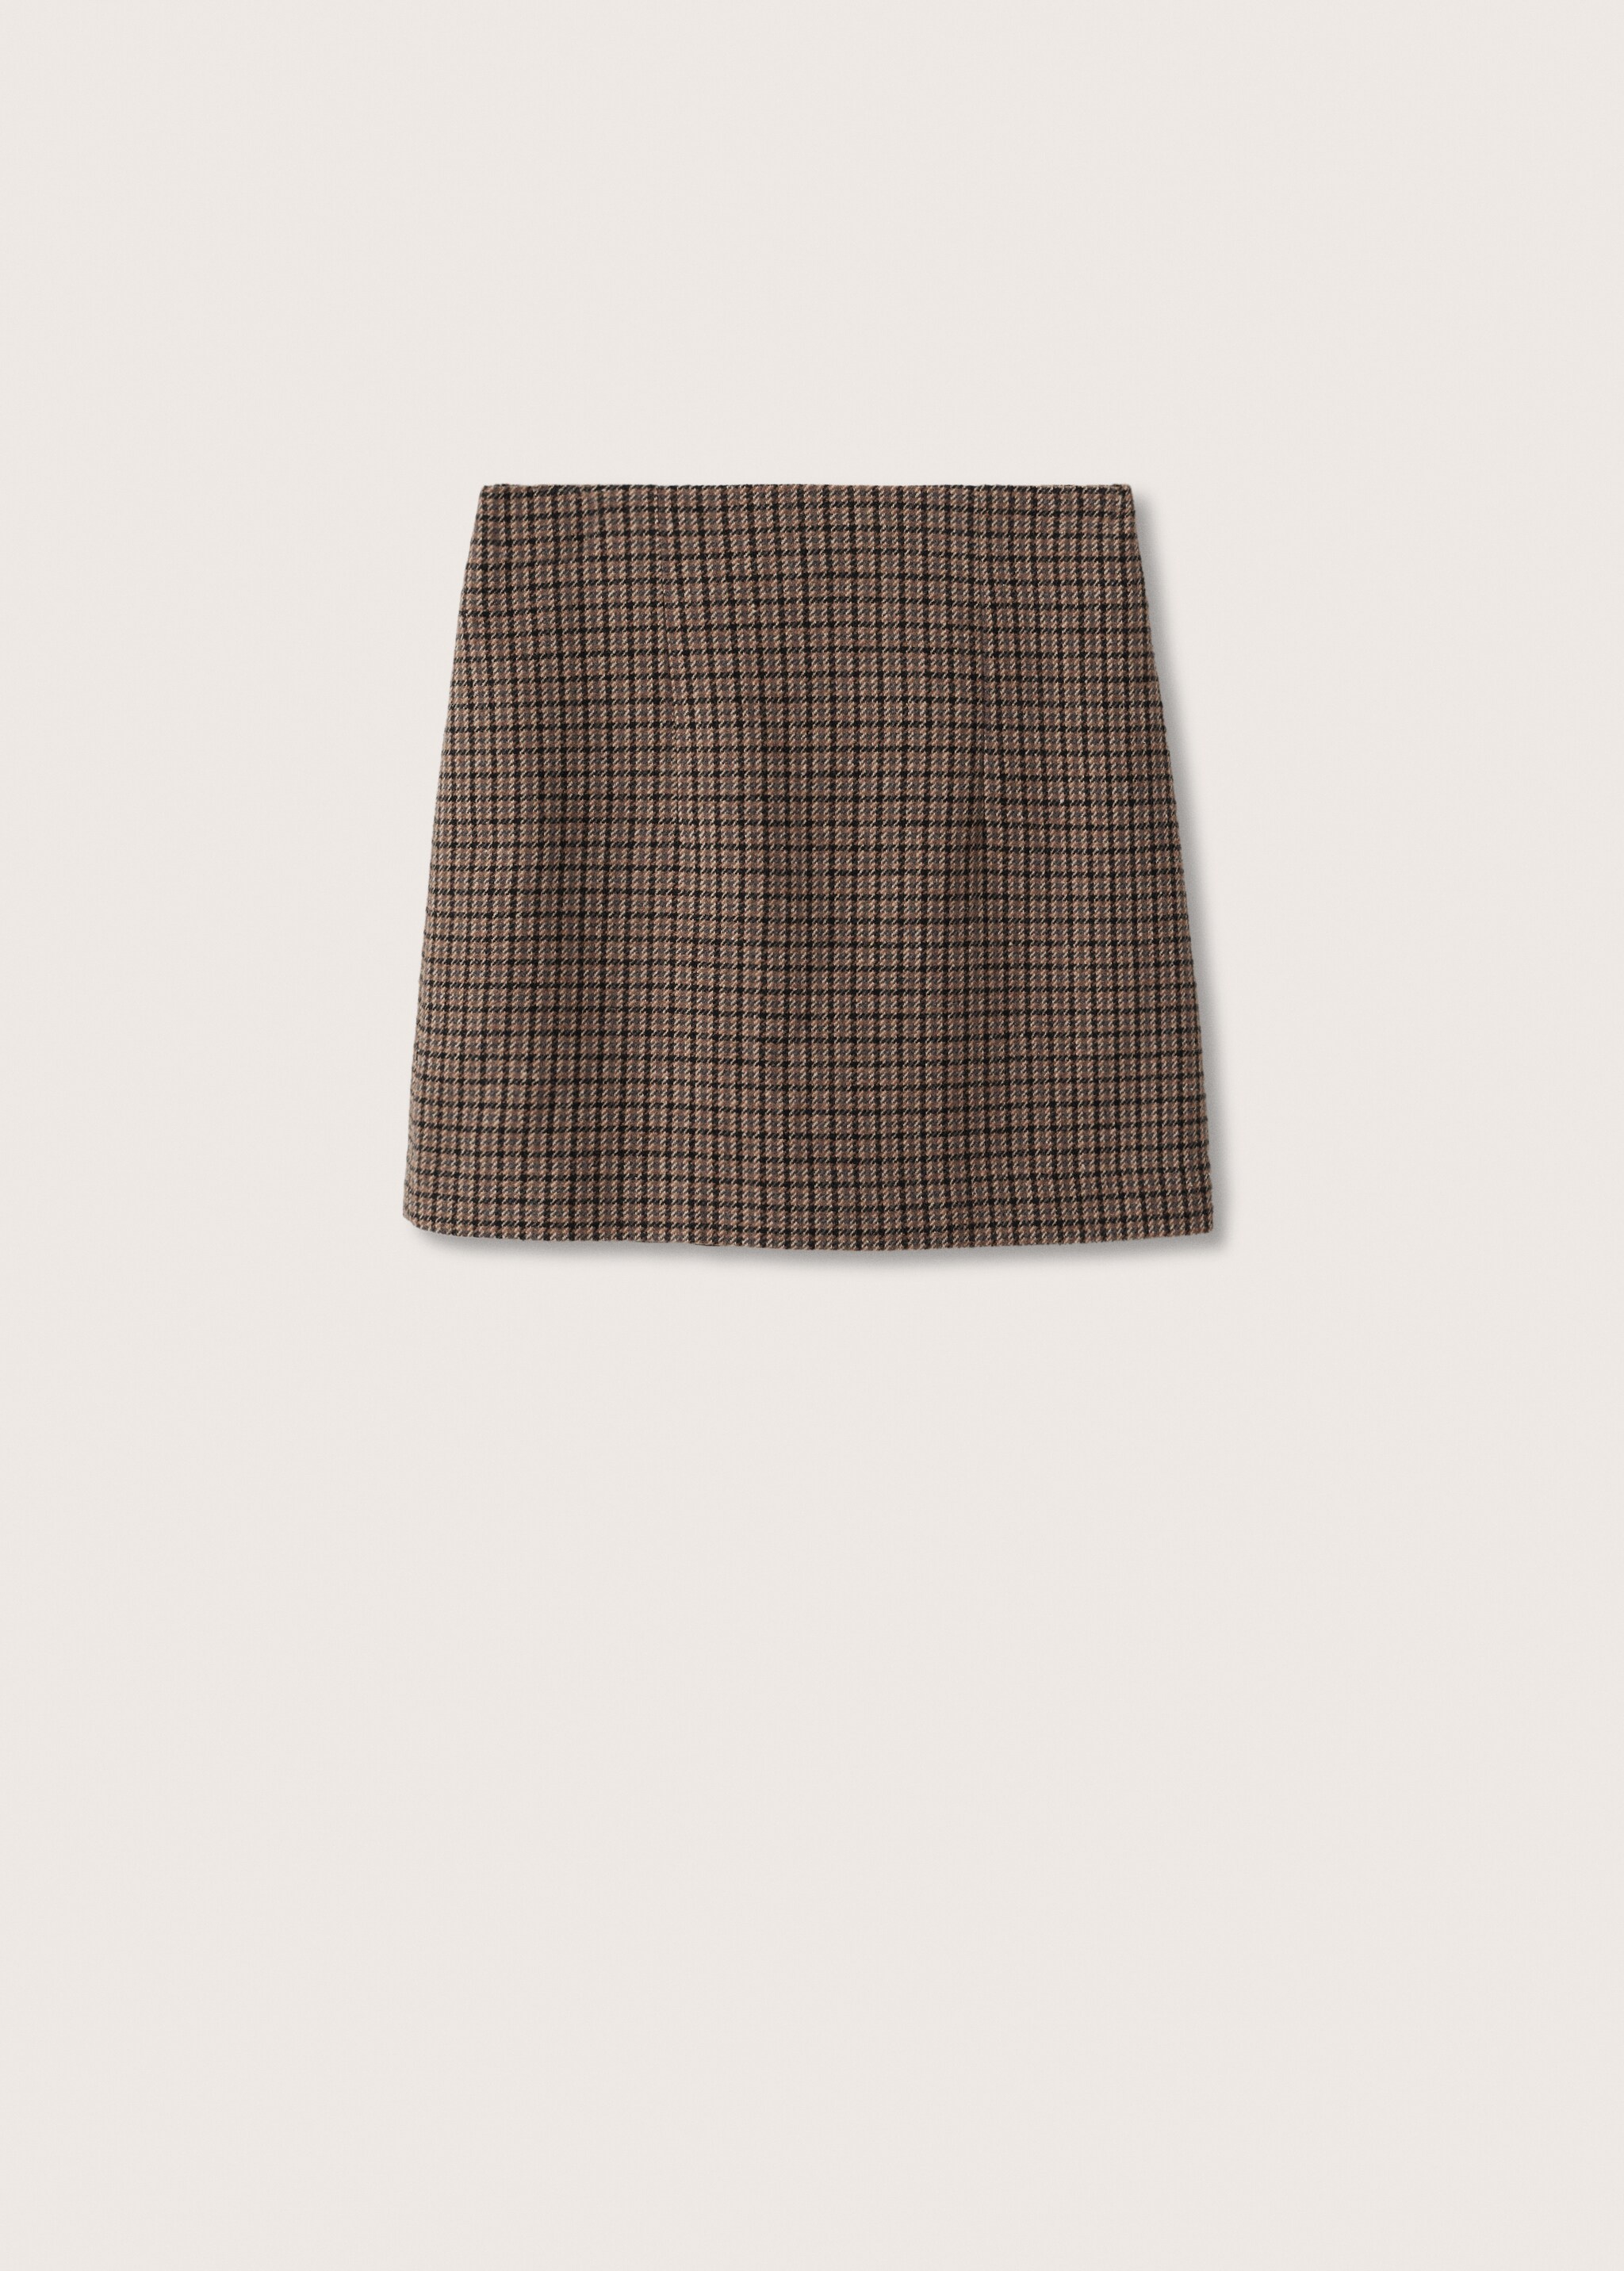 Houndstooth miniskirt - Article without model